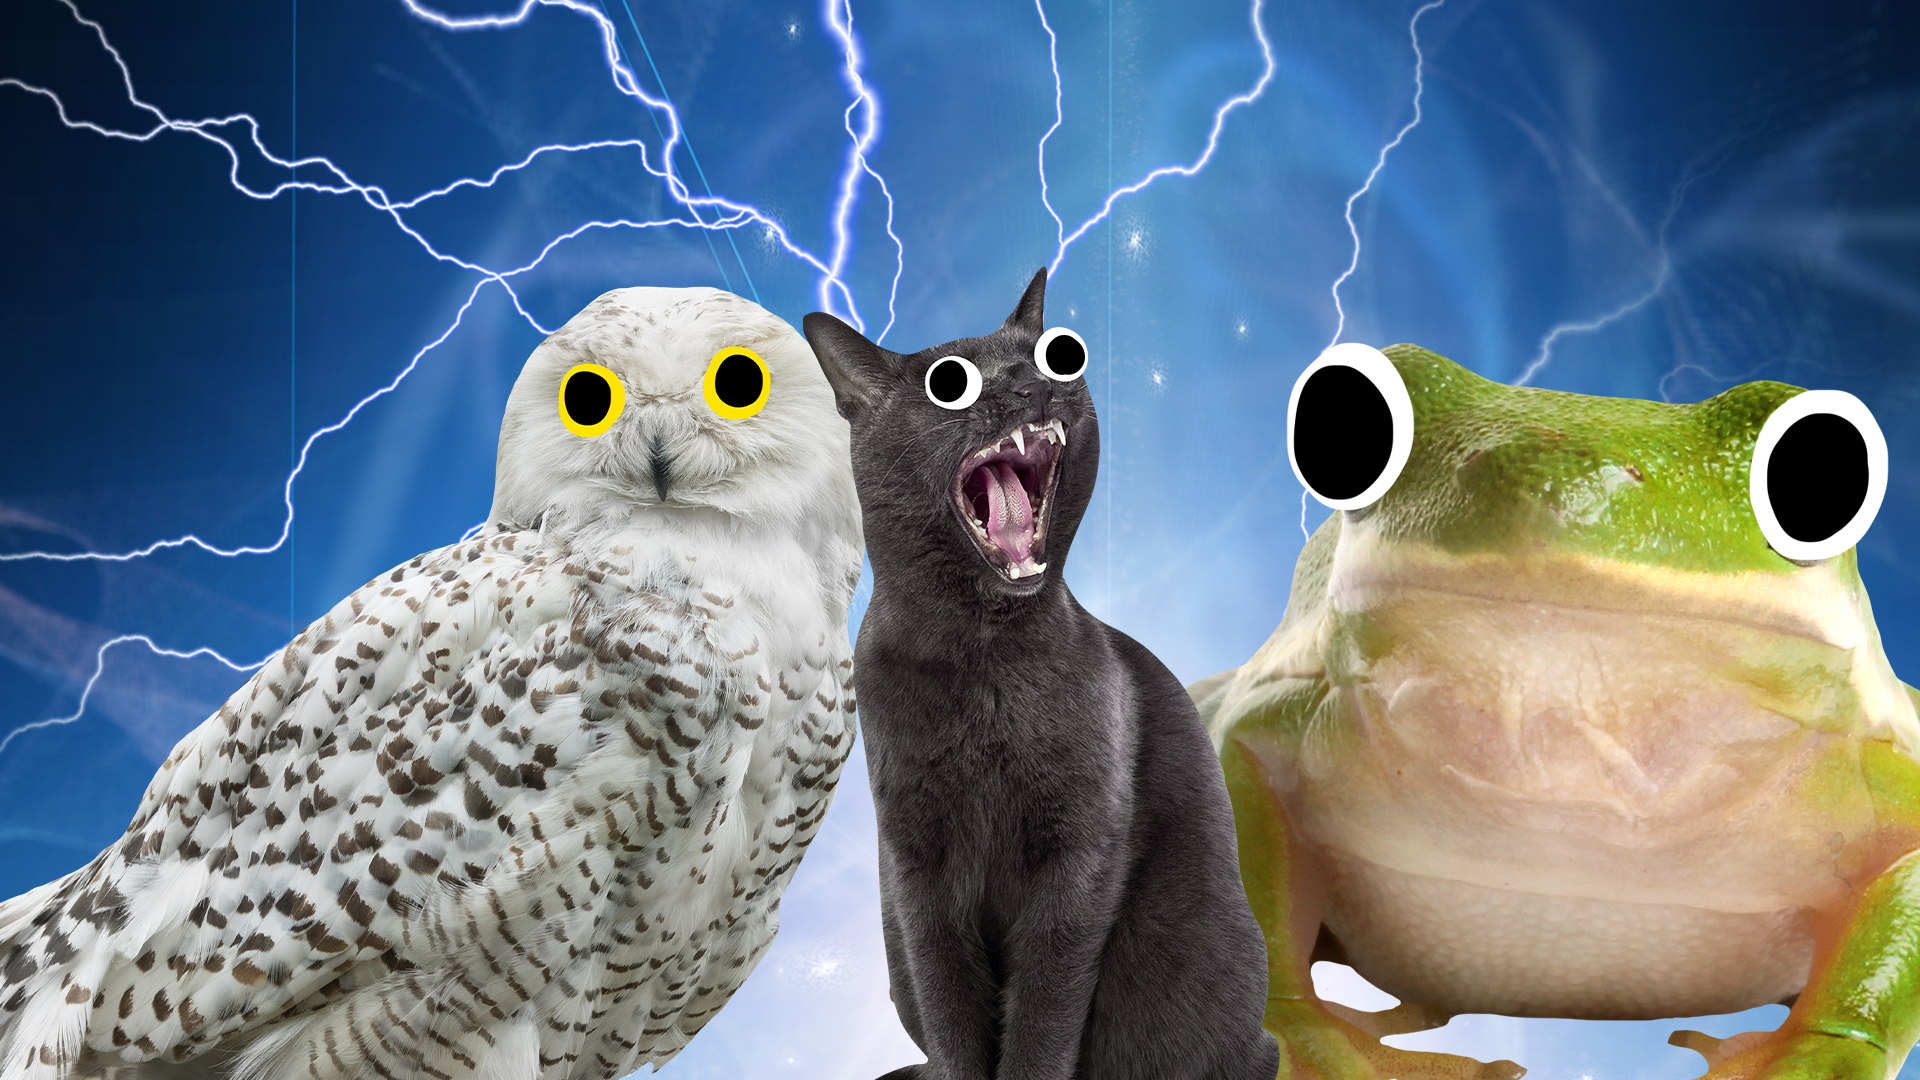 Owl, cat and frog on magical background 